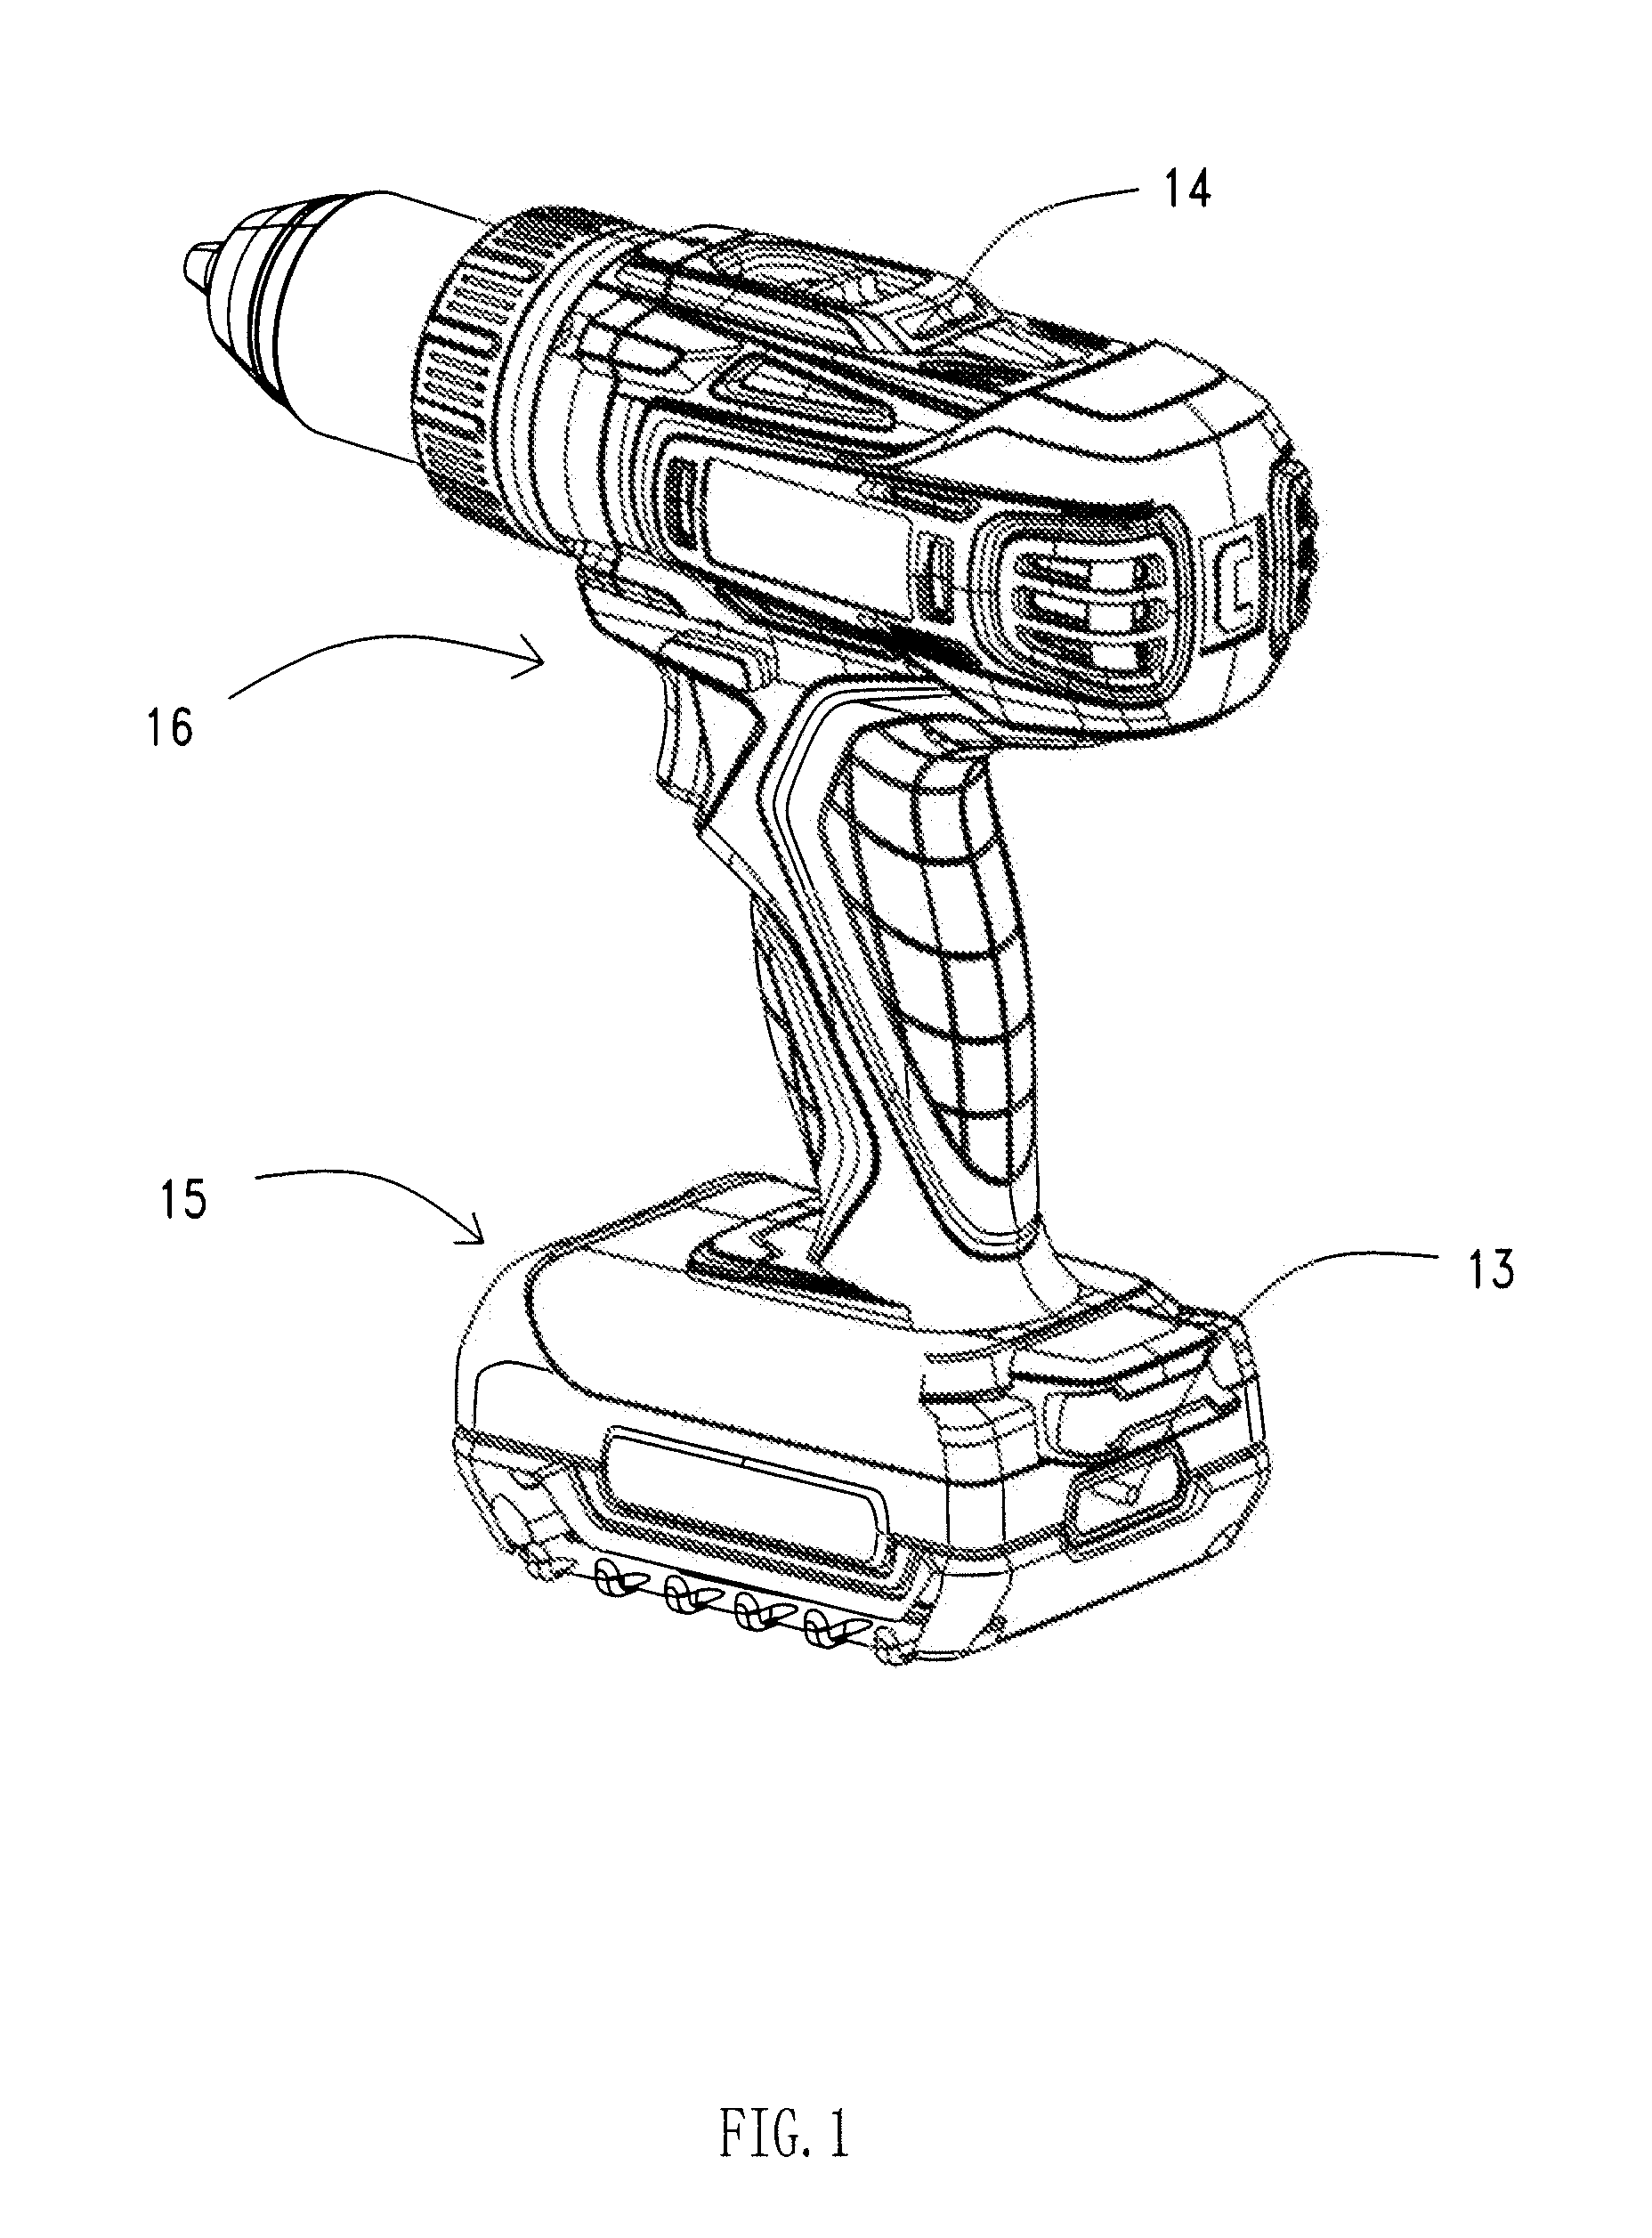 Control circuit and method for manipulating a power tool